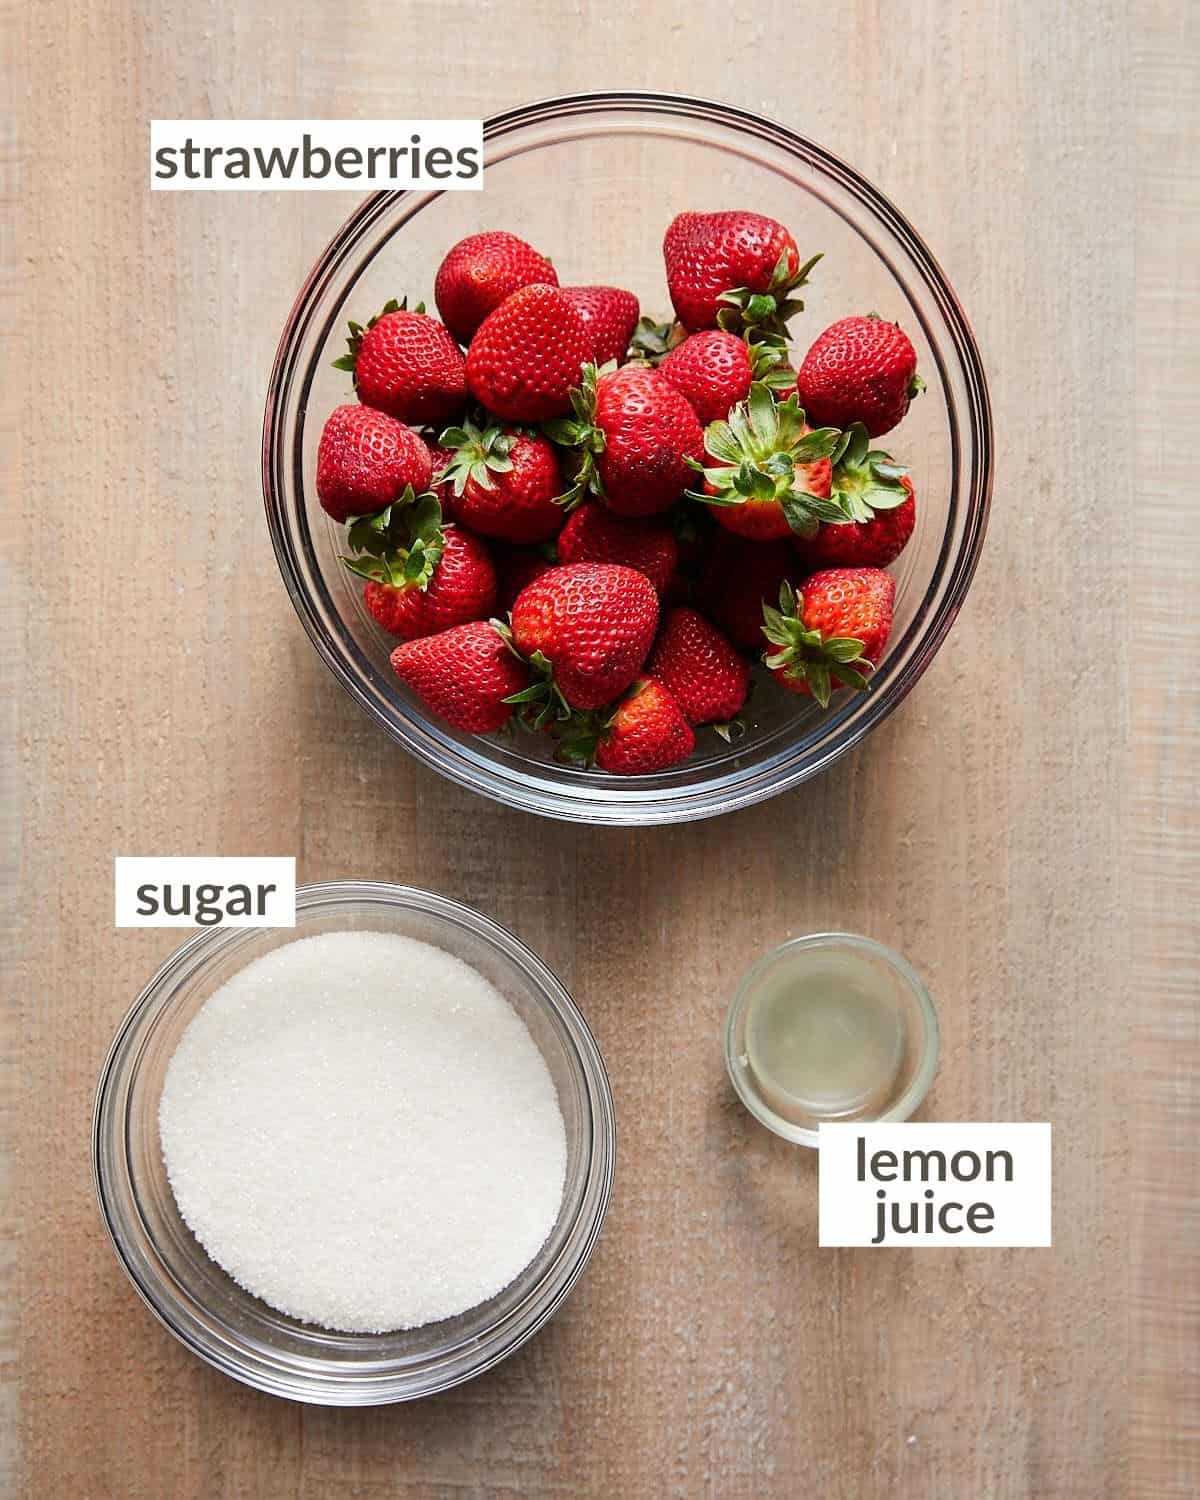 Overhead image of ingredients needed to make strawberry preserves.